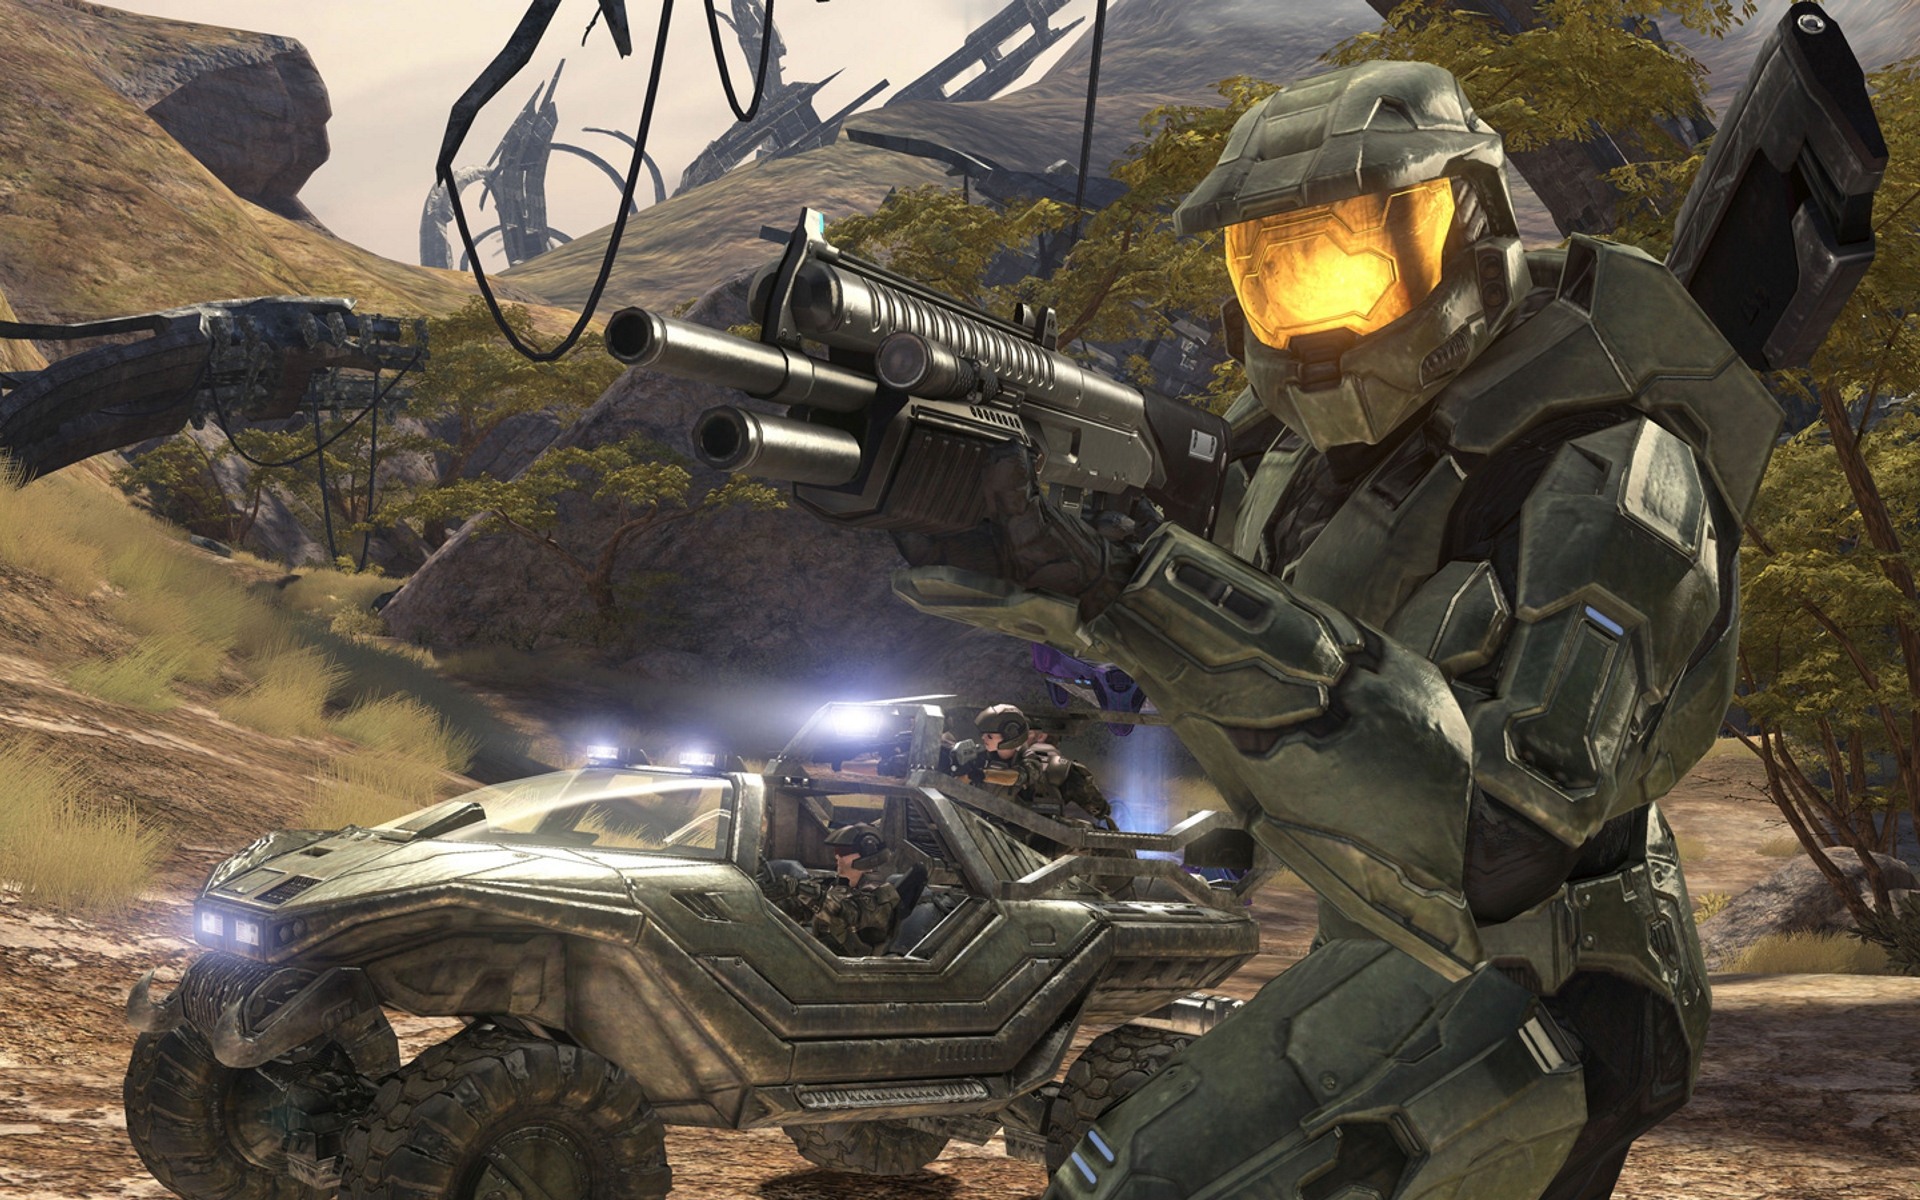 Halo game HD wallpapers #13 - 1920x1200